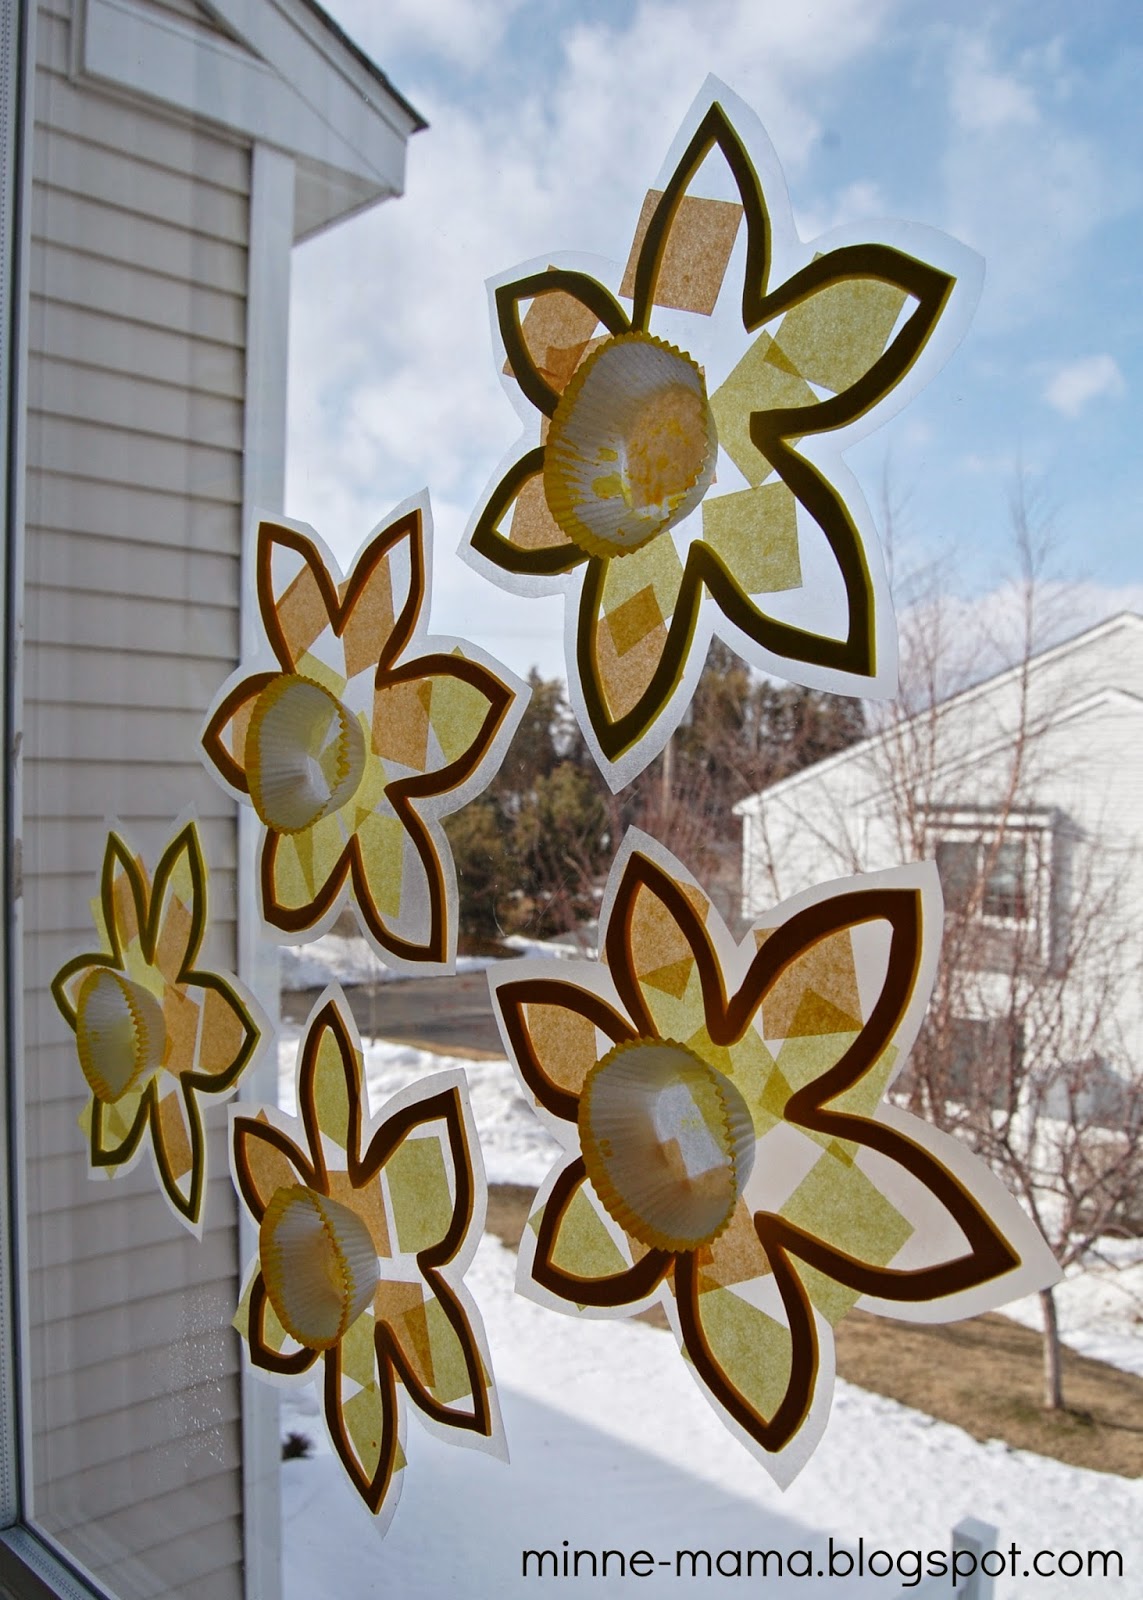 {Guest Post} Toddler-Made Spring Suncatchers by Minne-Mama for Fun at Home with Kids